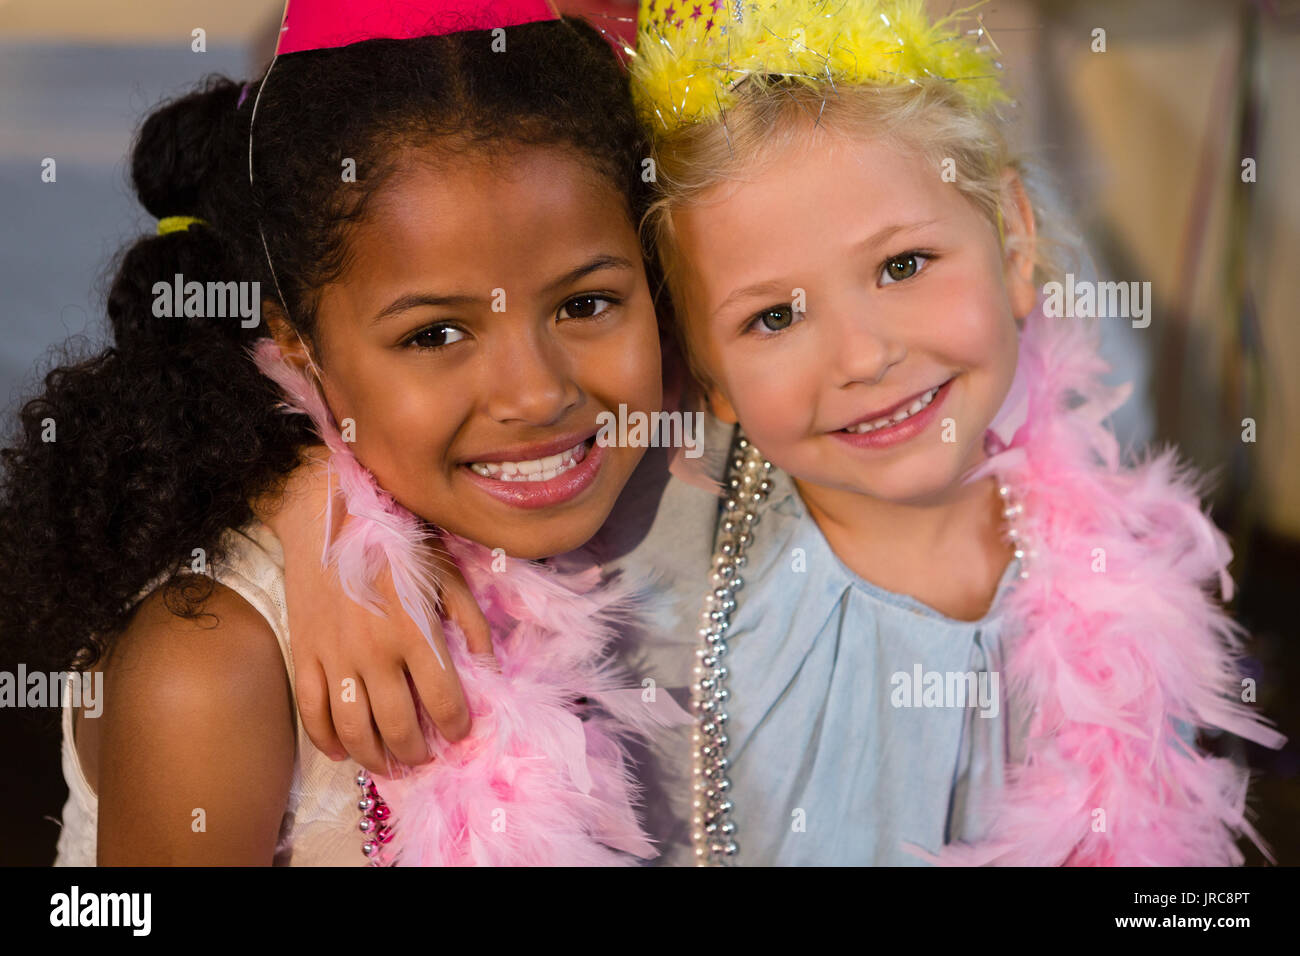 Portrait of smiling girls with arm around wearing feather boa Stock Photo